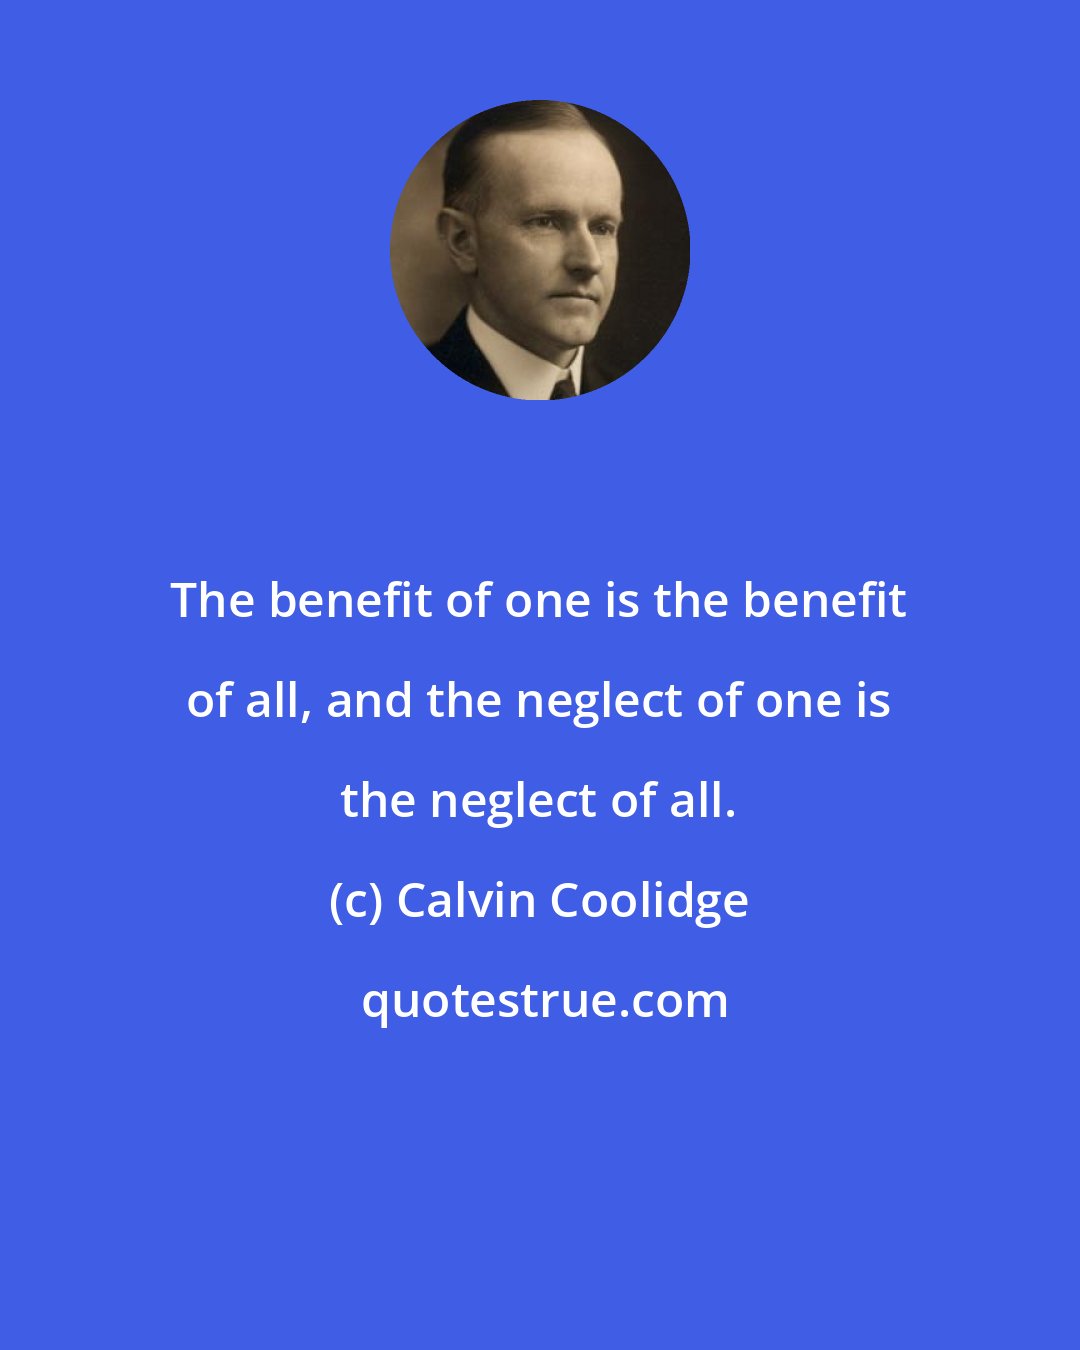 Calvin Coolidge: The benefit of one is the benefit of all, and the neglect of one is the neglect of all.